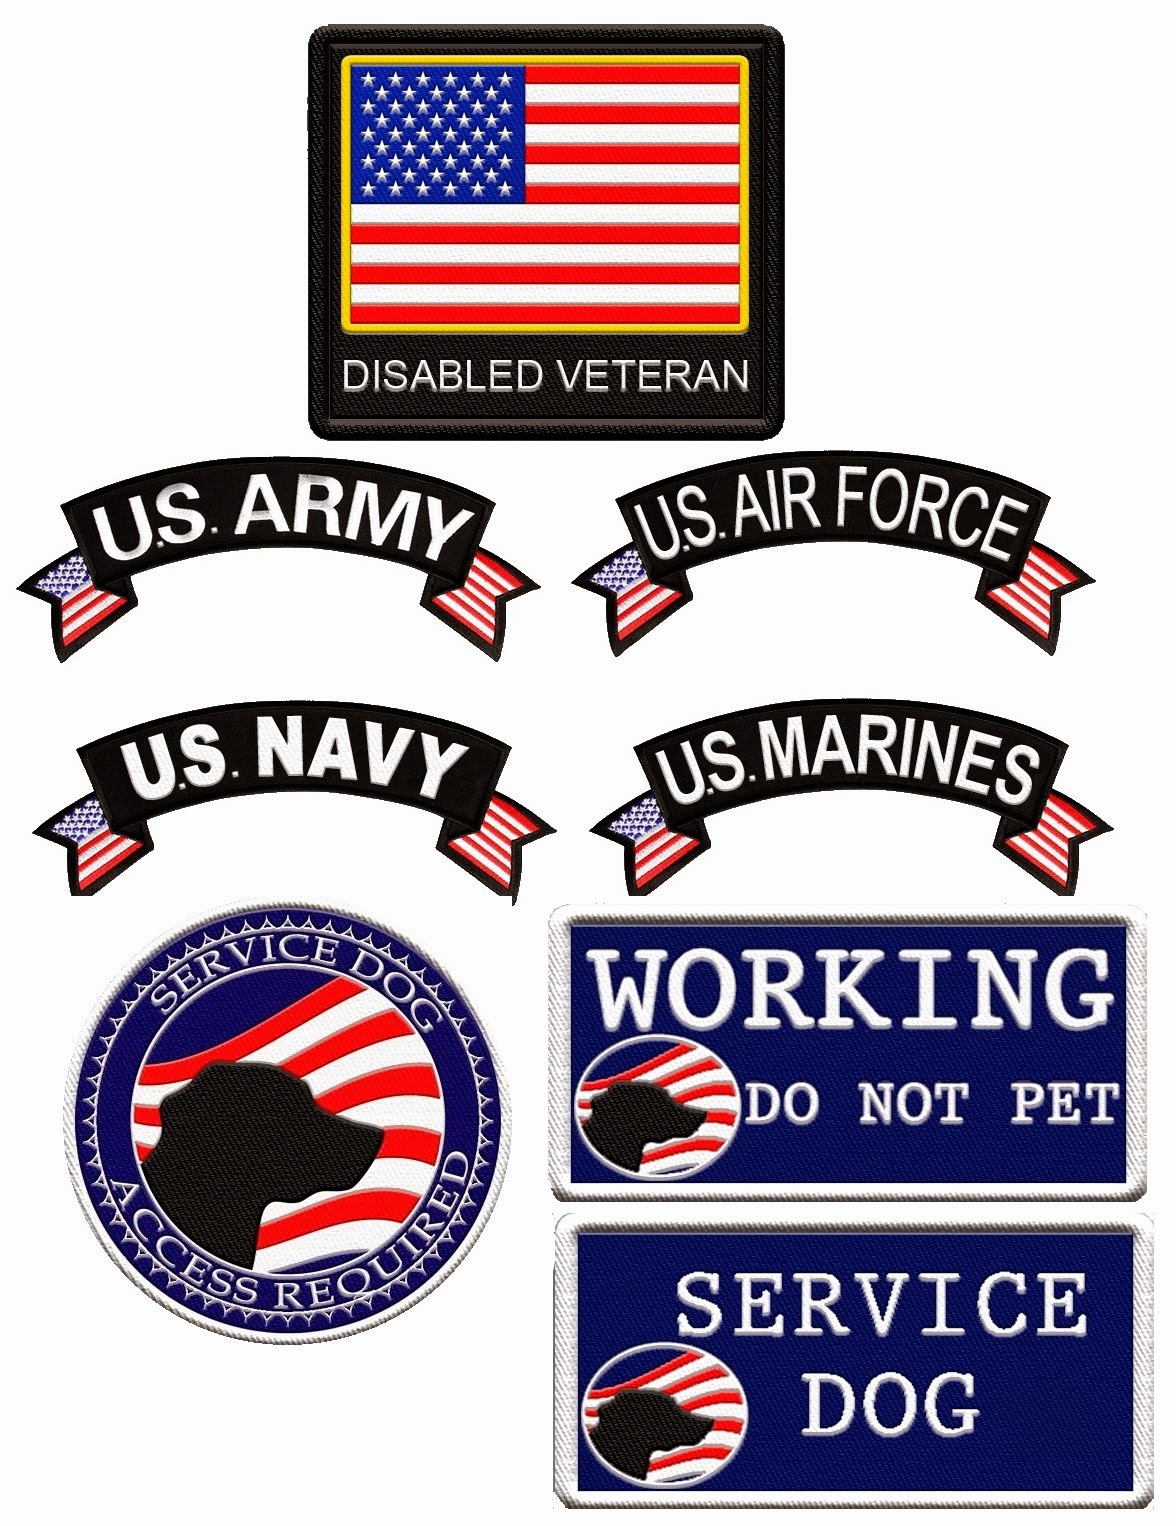 http://www.workingservicedog.com/search.aspx?find=american+flag+patch